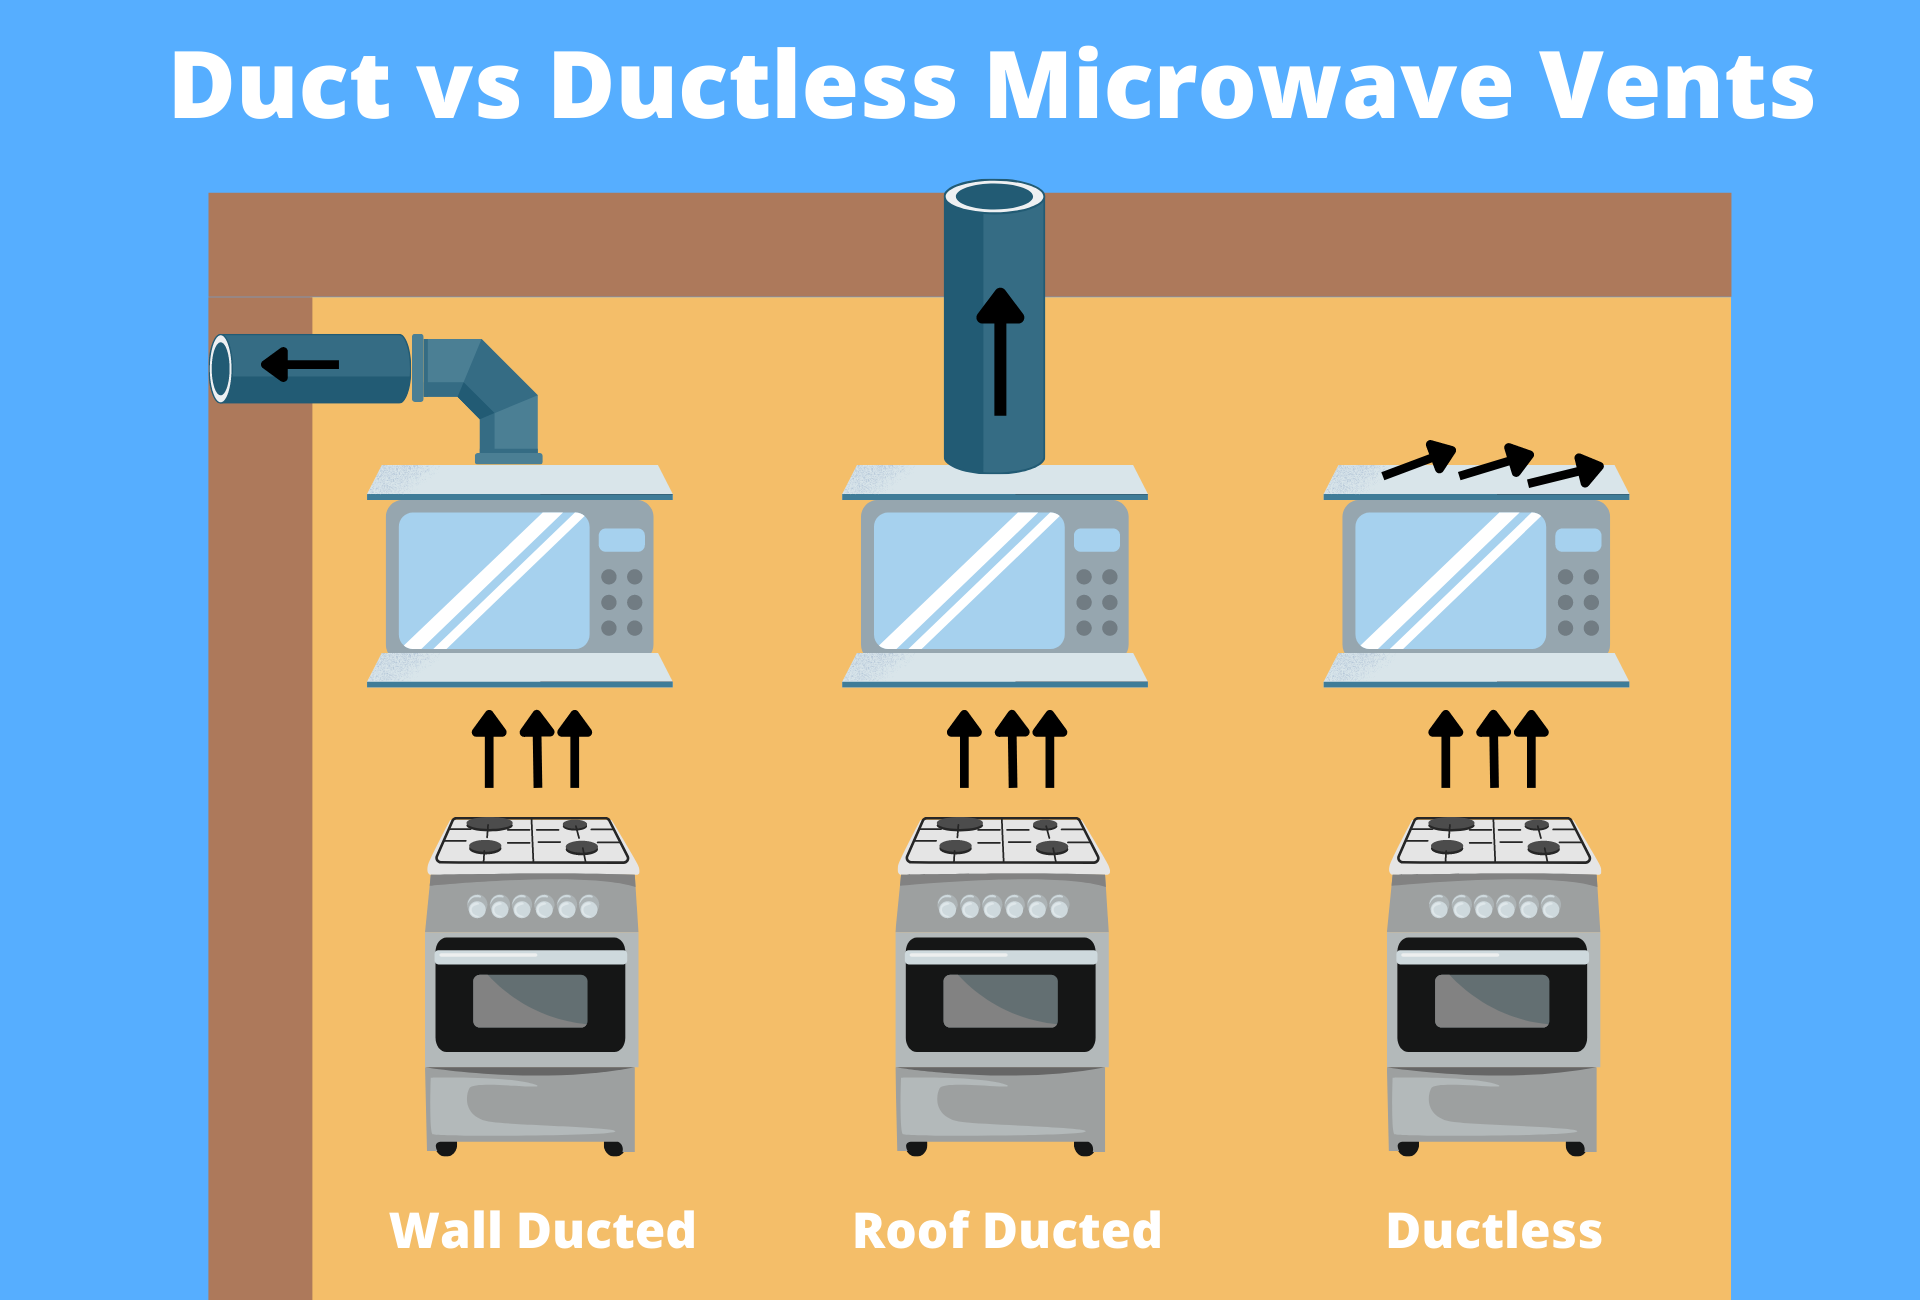 duct vs ductless microwave venting options